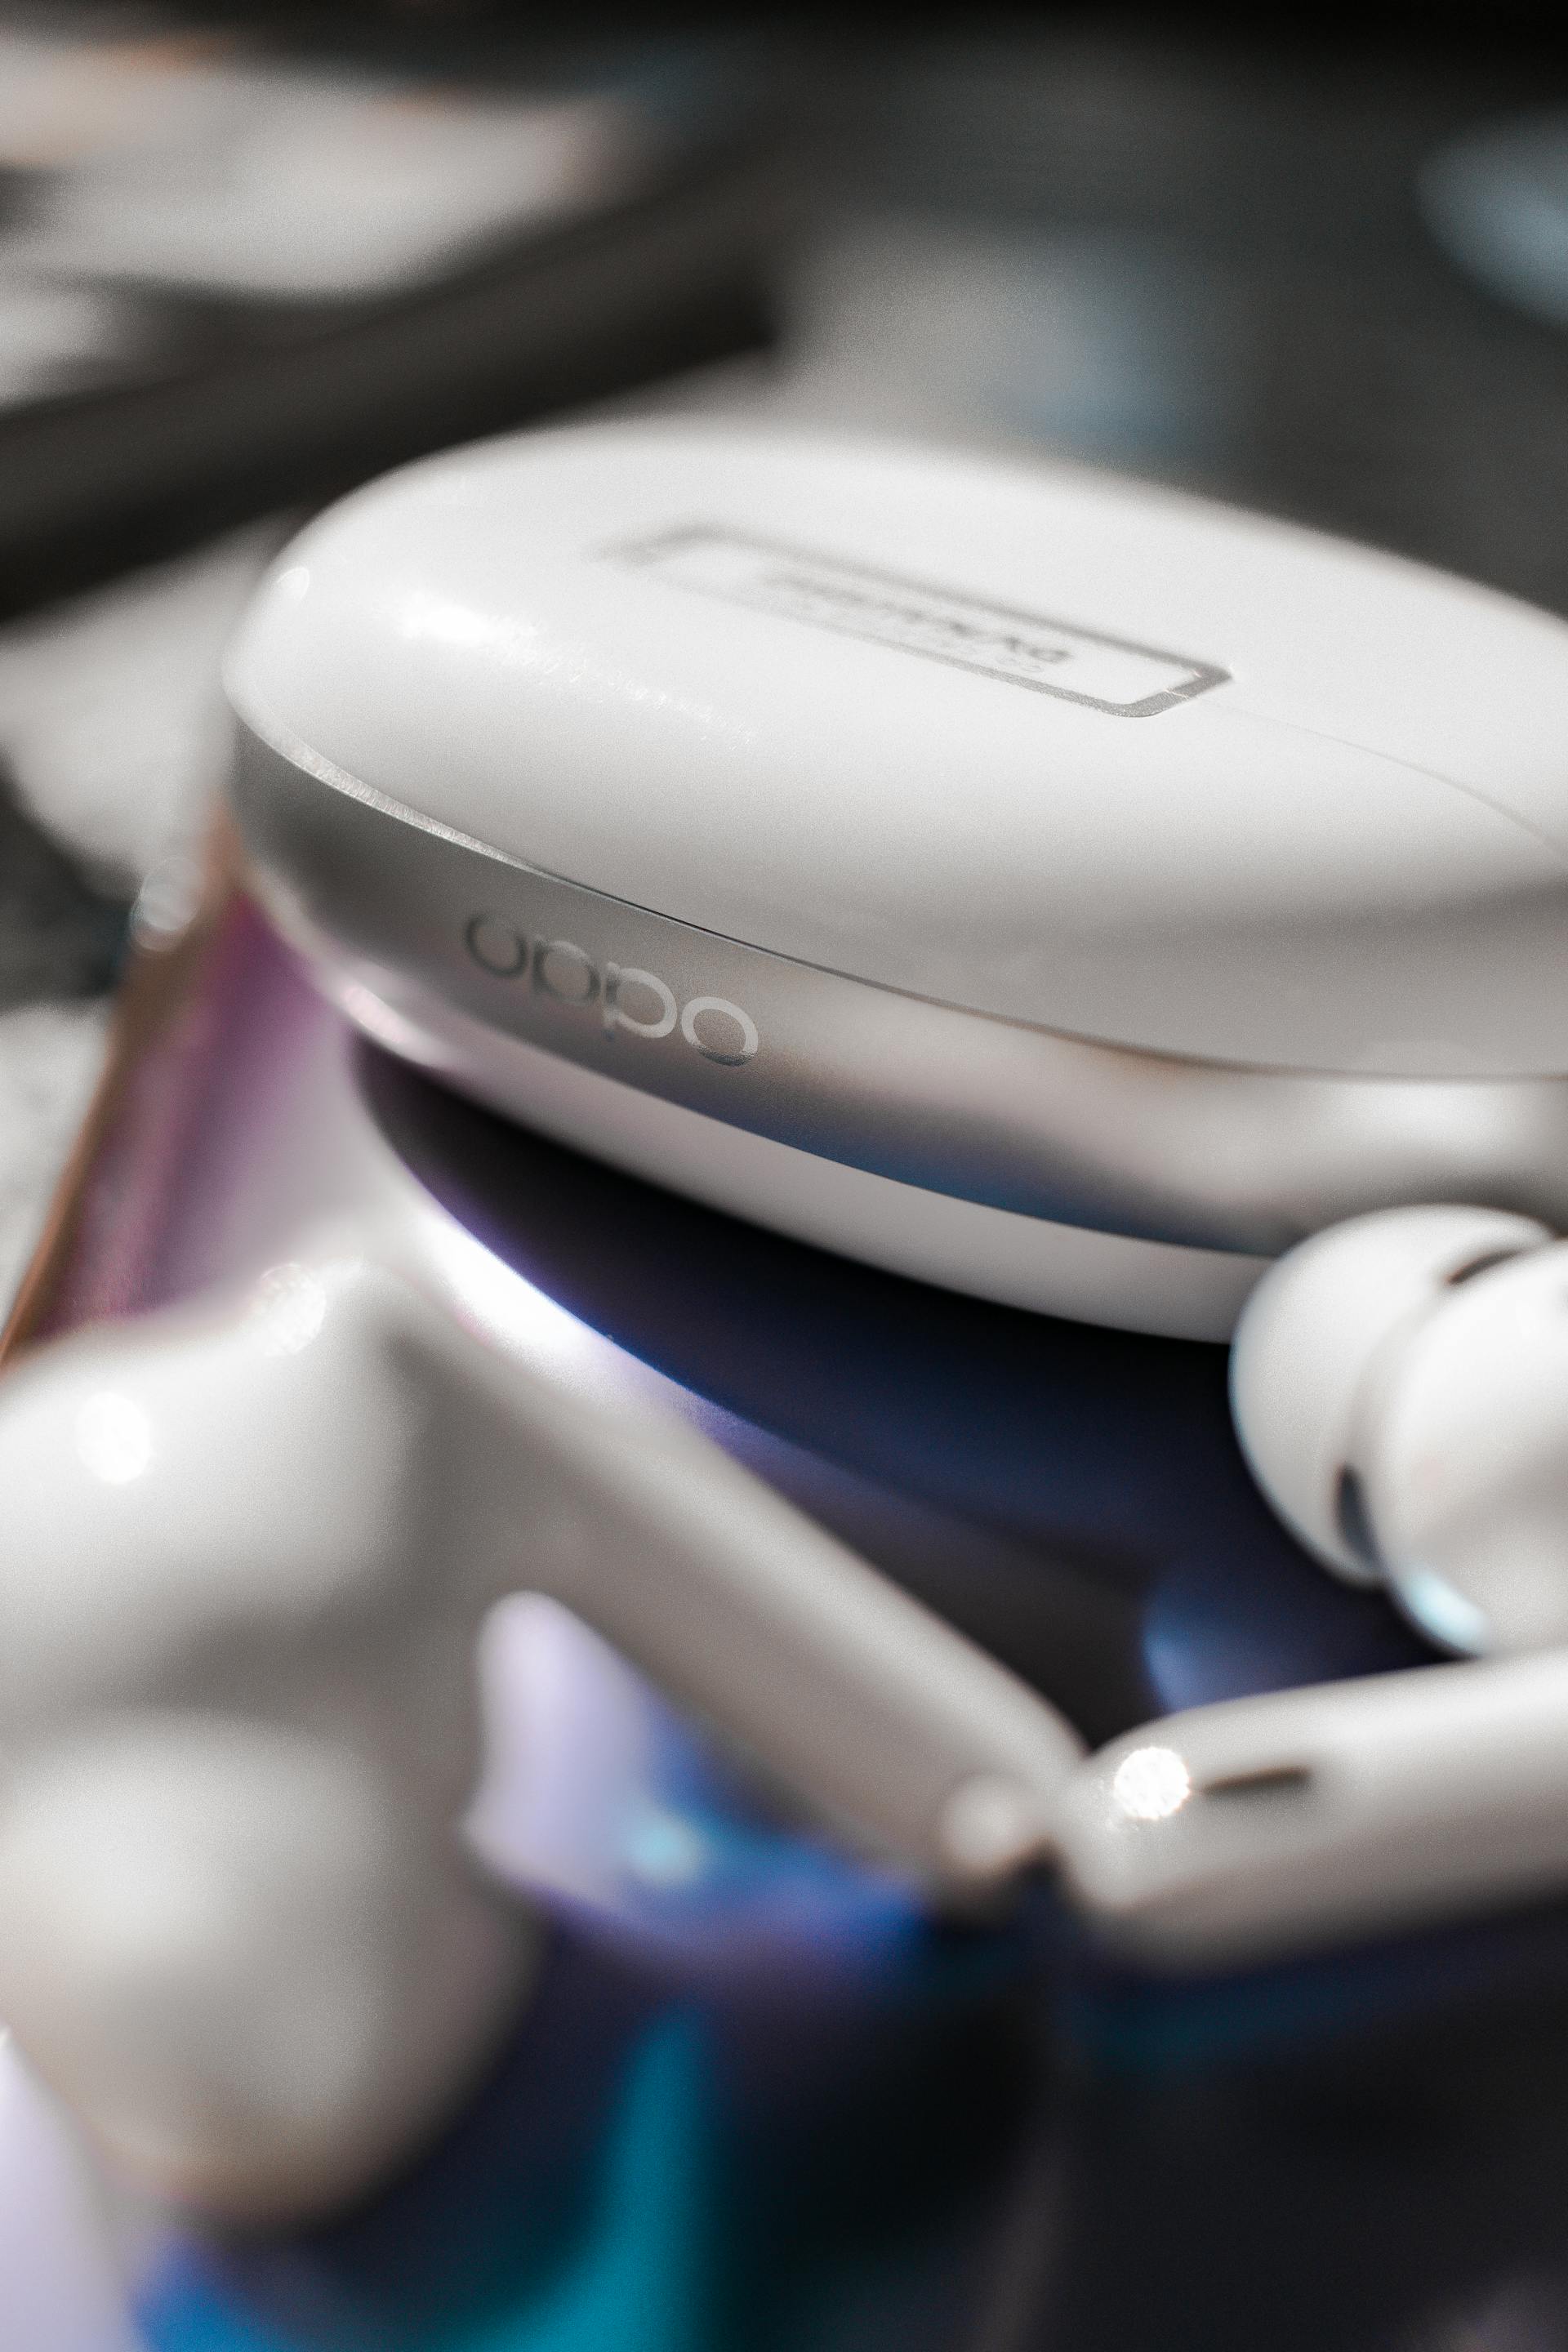 A close-up photo of a Bluetooth headset | Source: Pexels